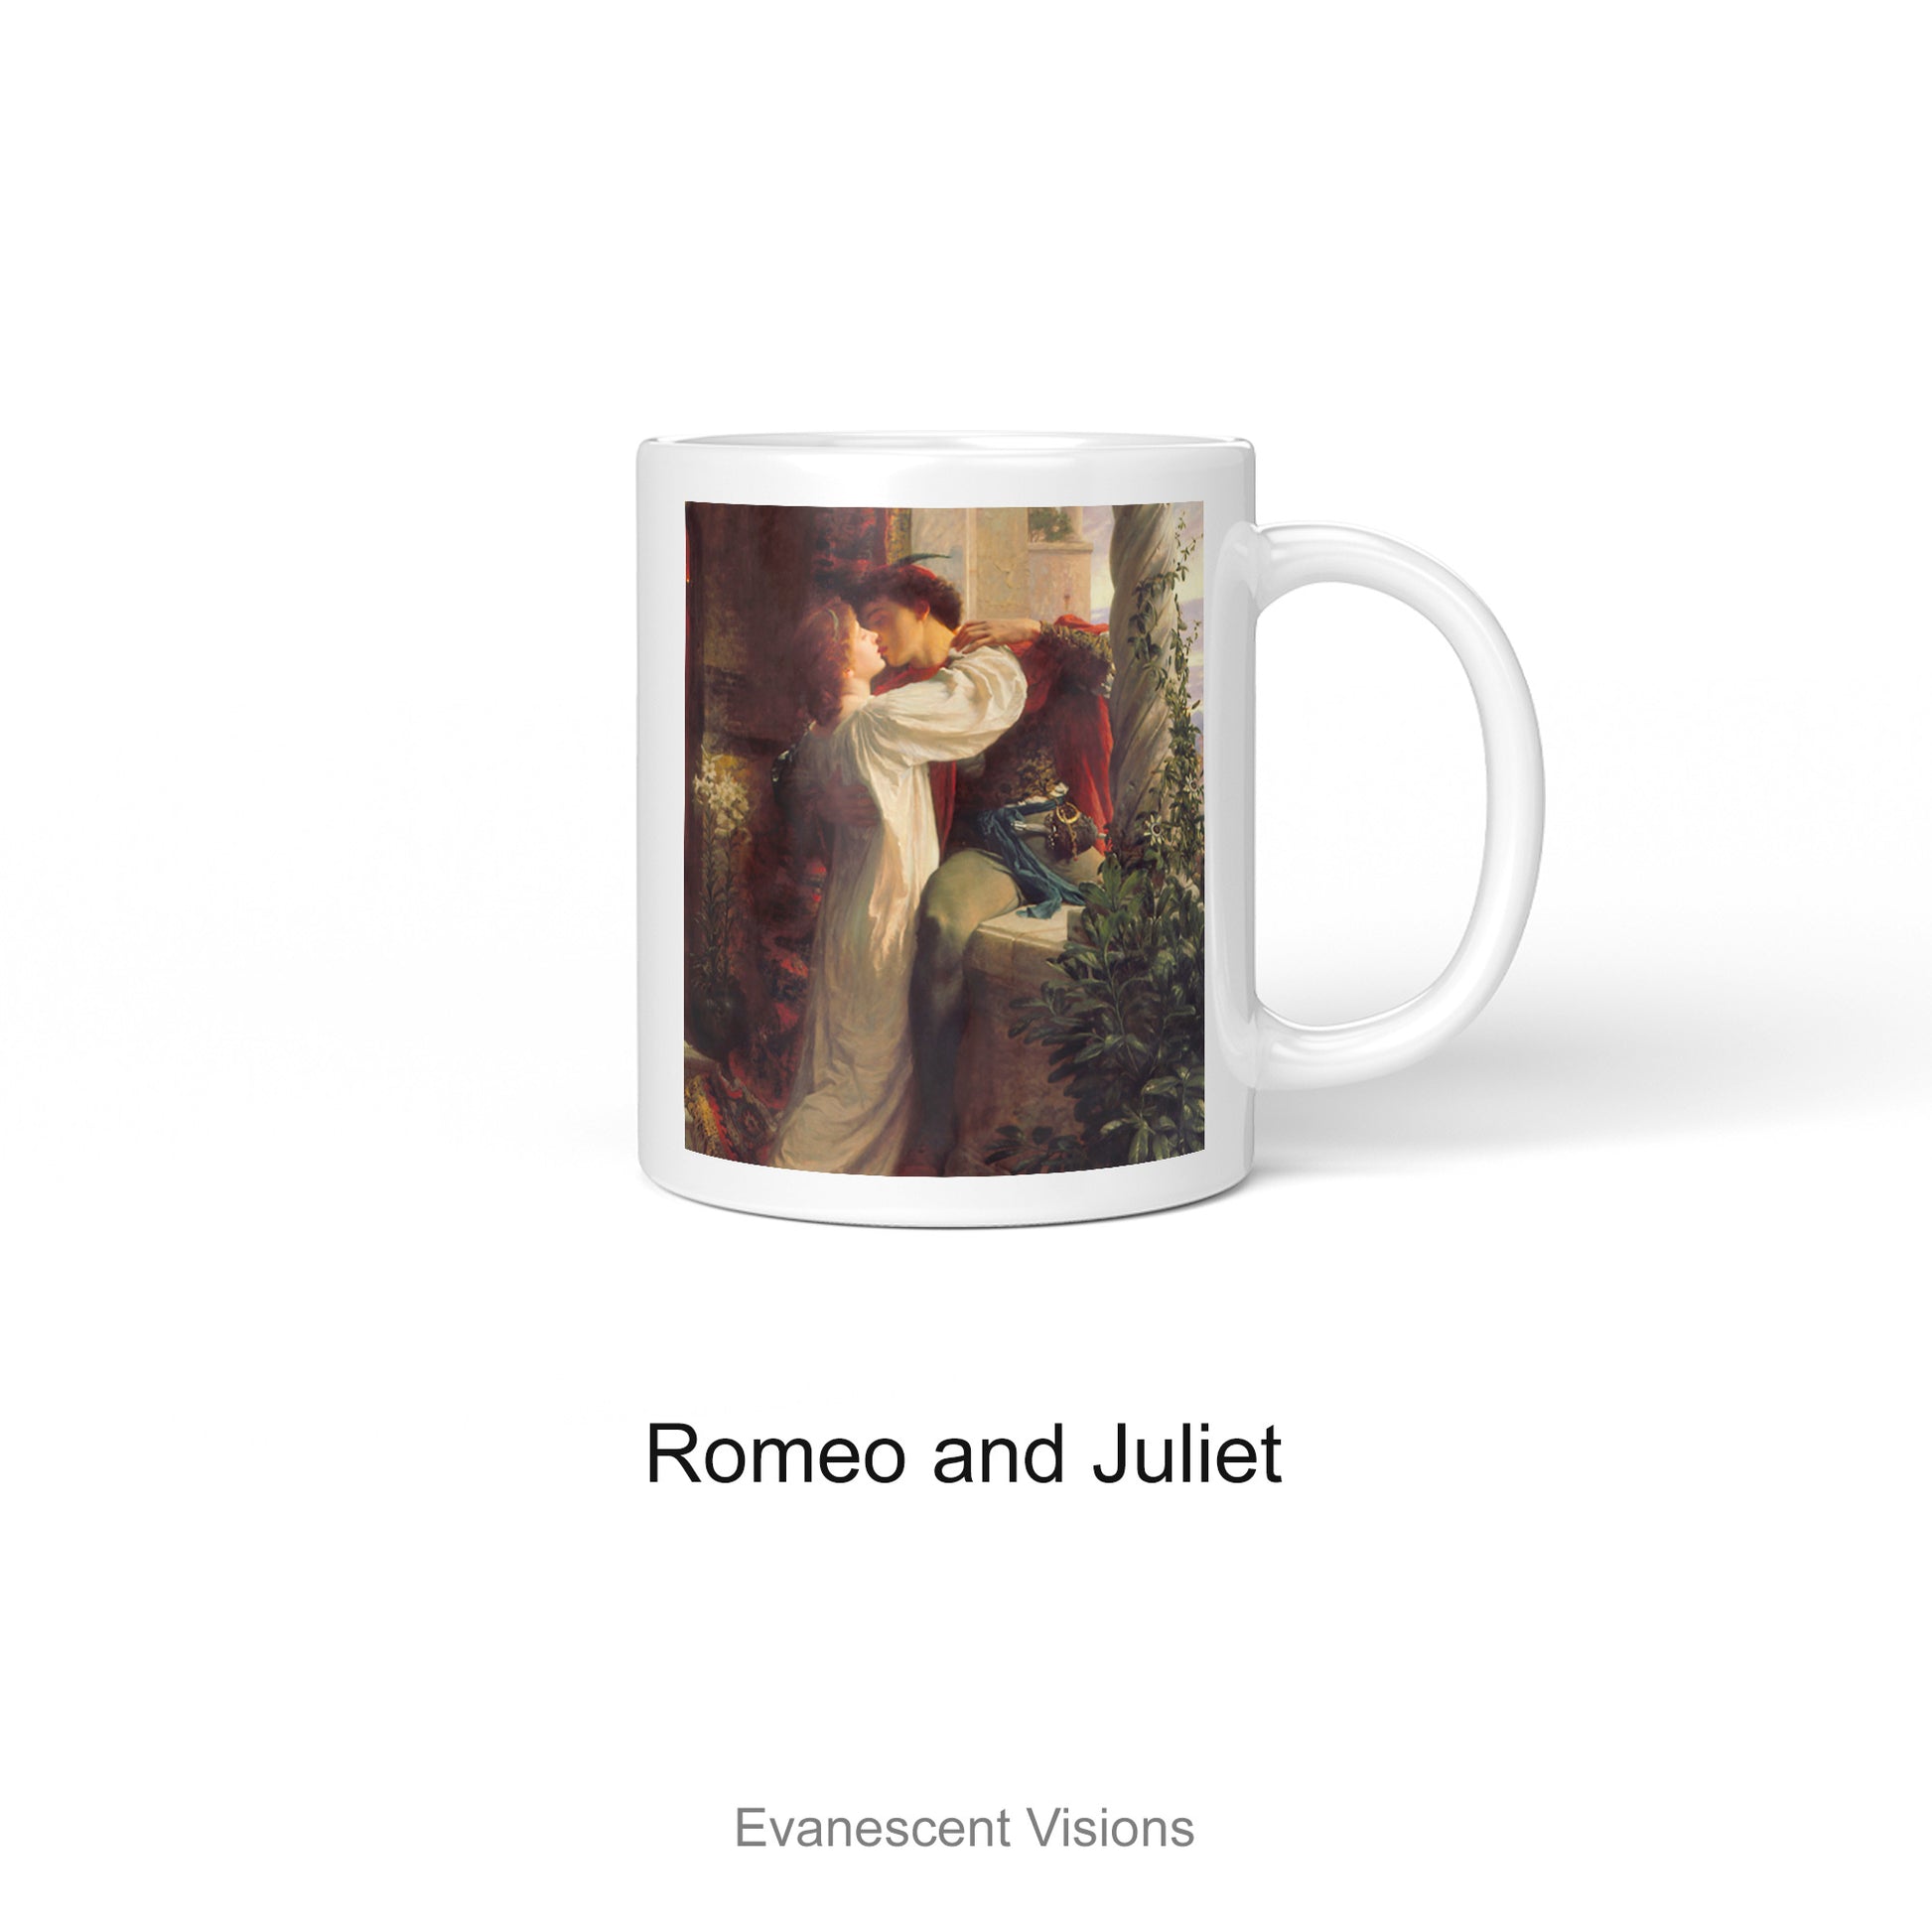 Romeo and Juliet personalised Art Mug for Anniversary or Valentine's Day